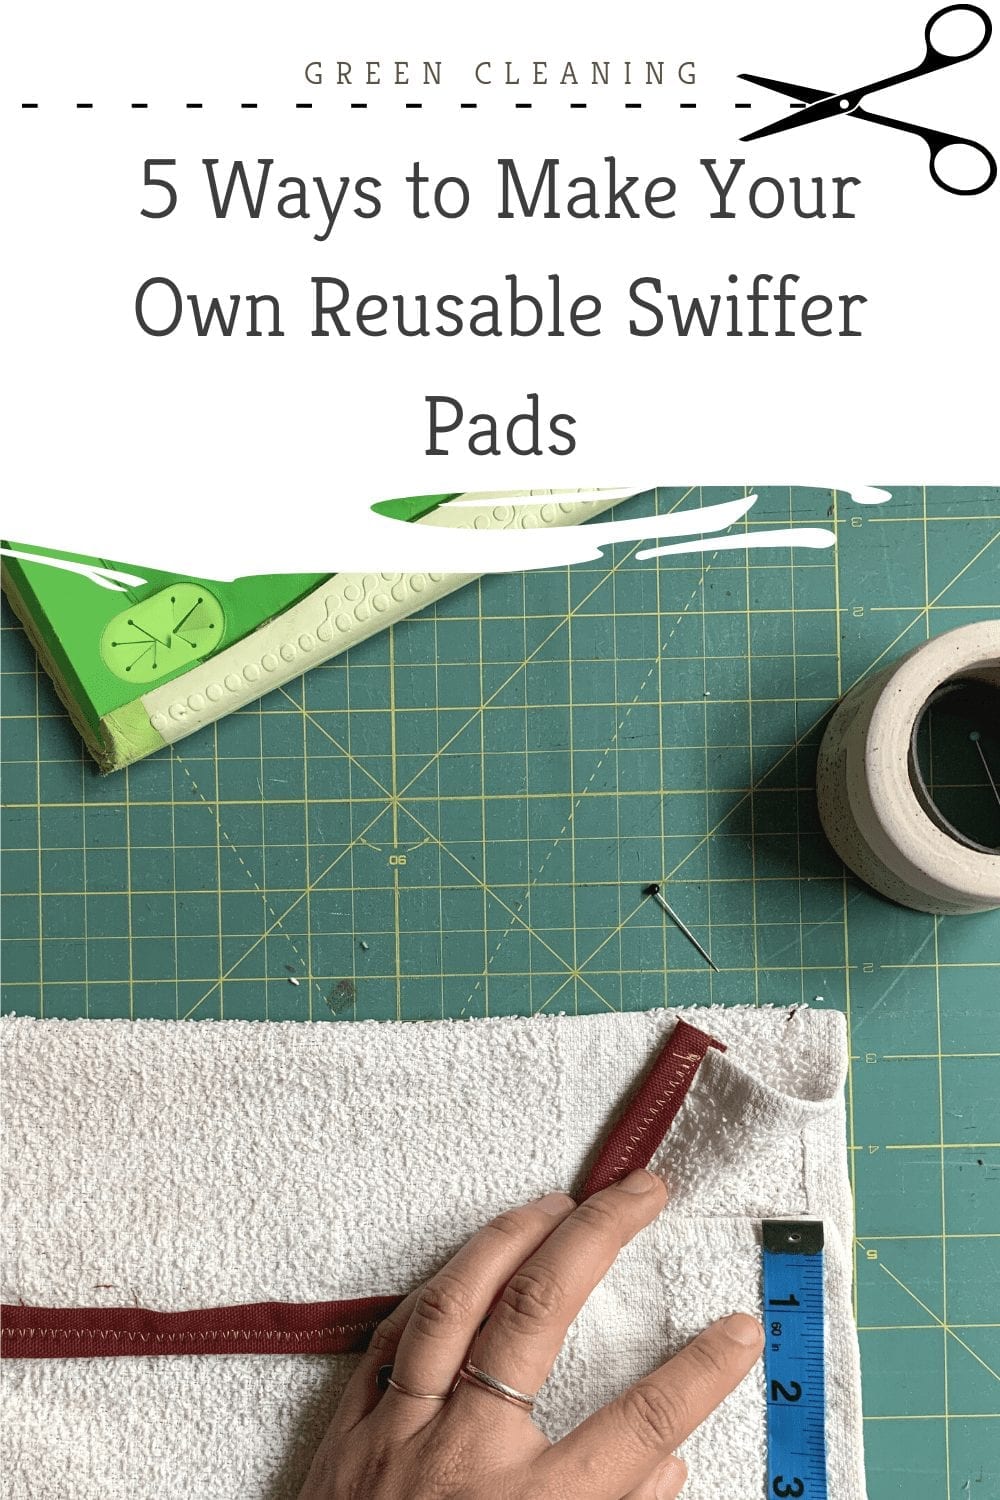 How To Make Reusable Swiffer Pads ⋆ A Rose Tinted World